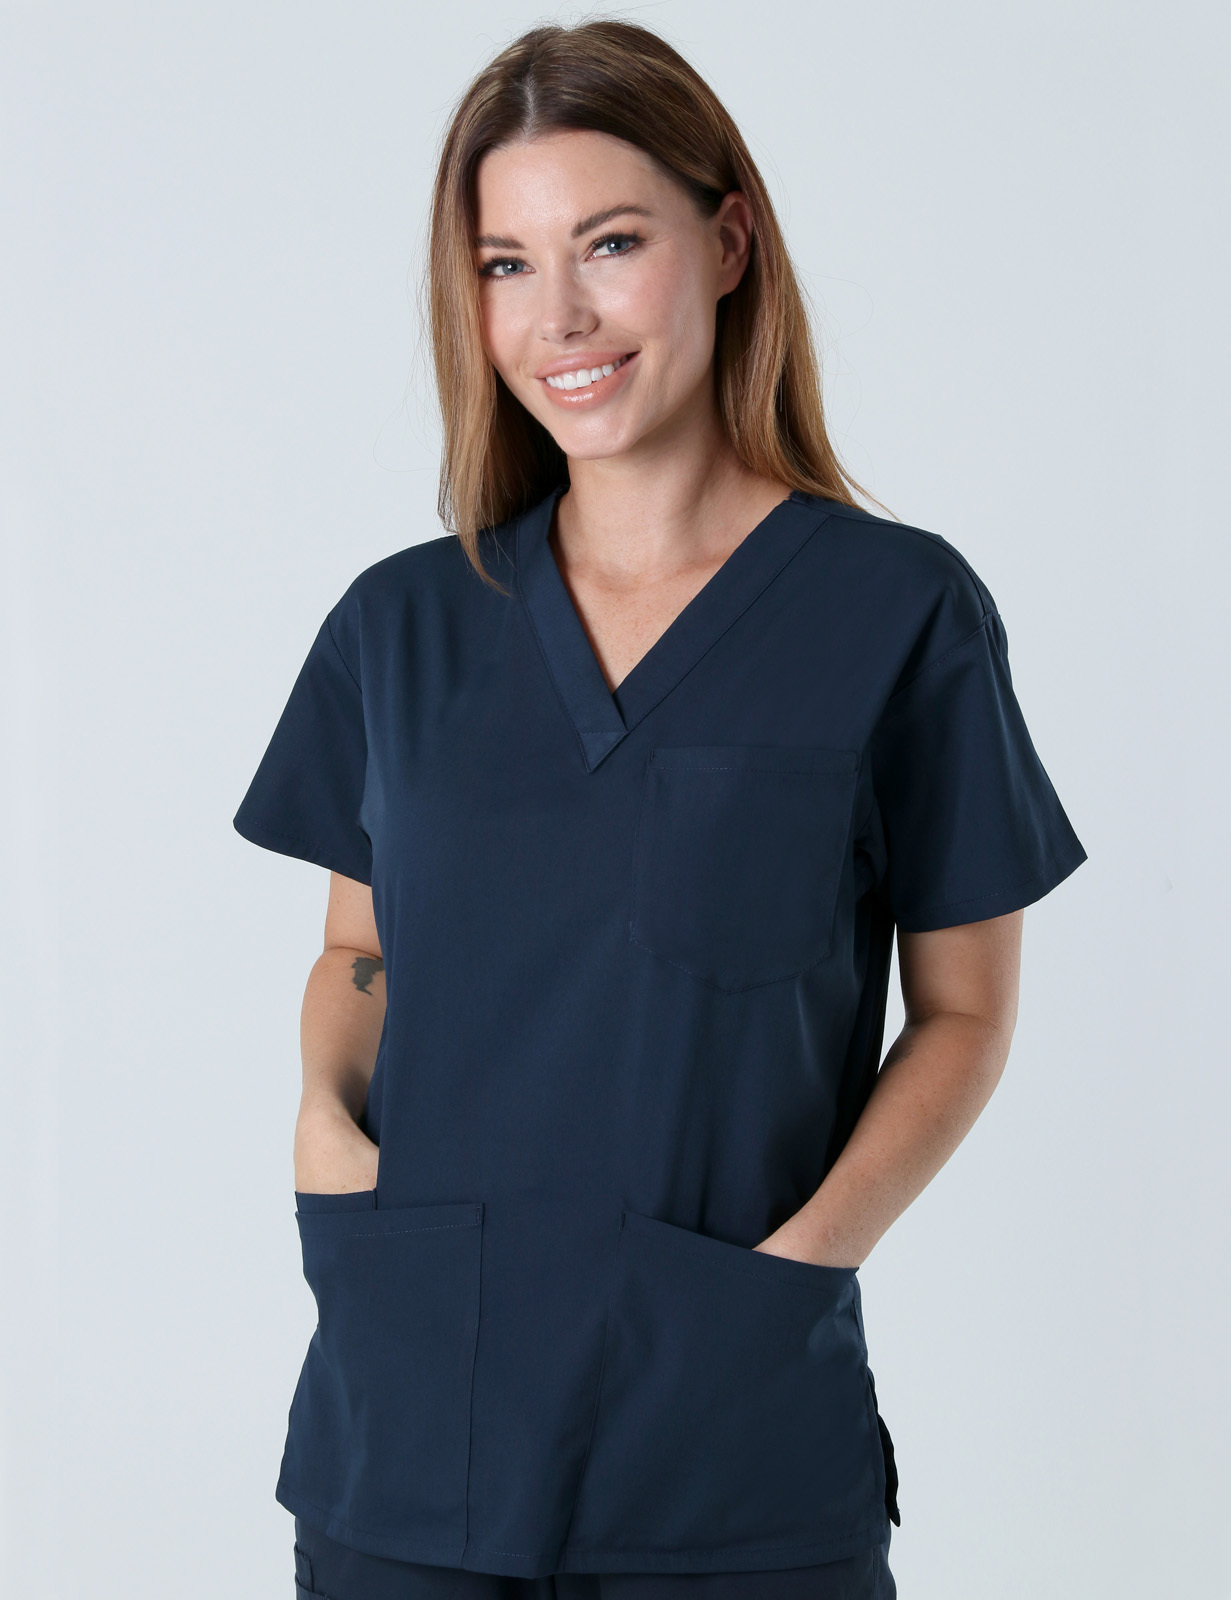 The Angliss Hospital - MI (4 Pocket Scrub Top and Cargo Pants in Navy incl Logos)